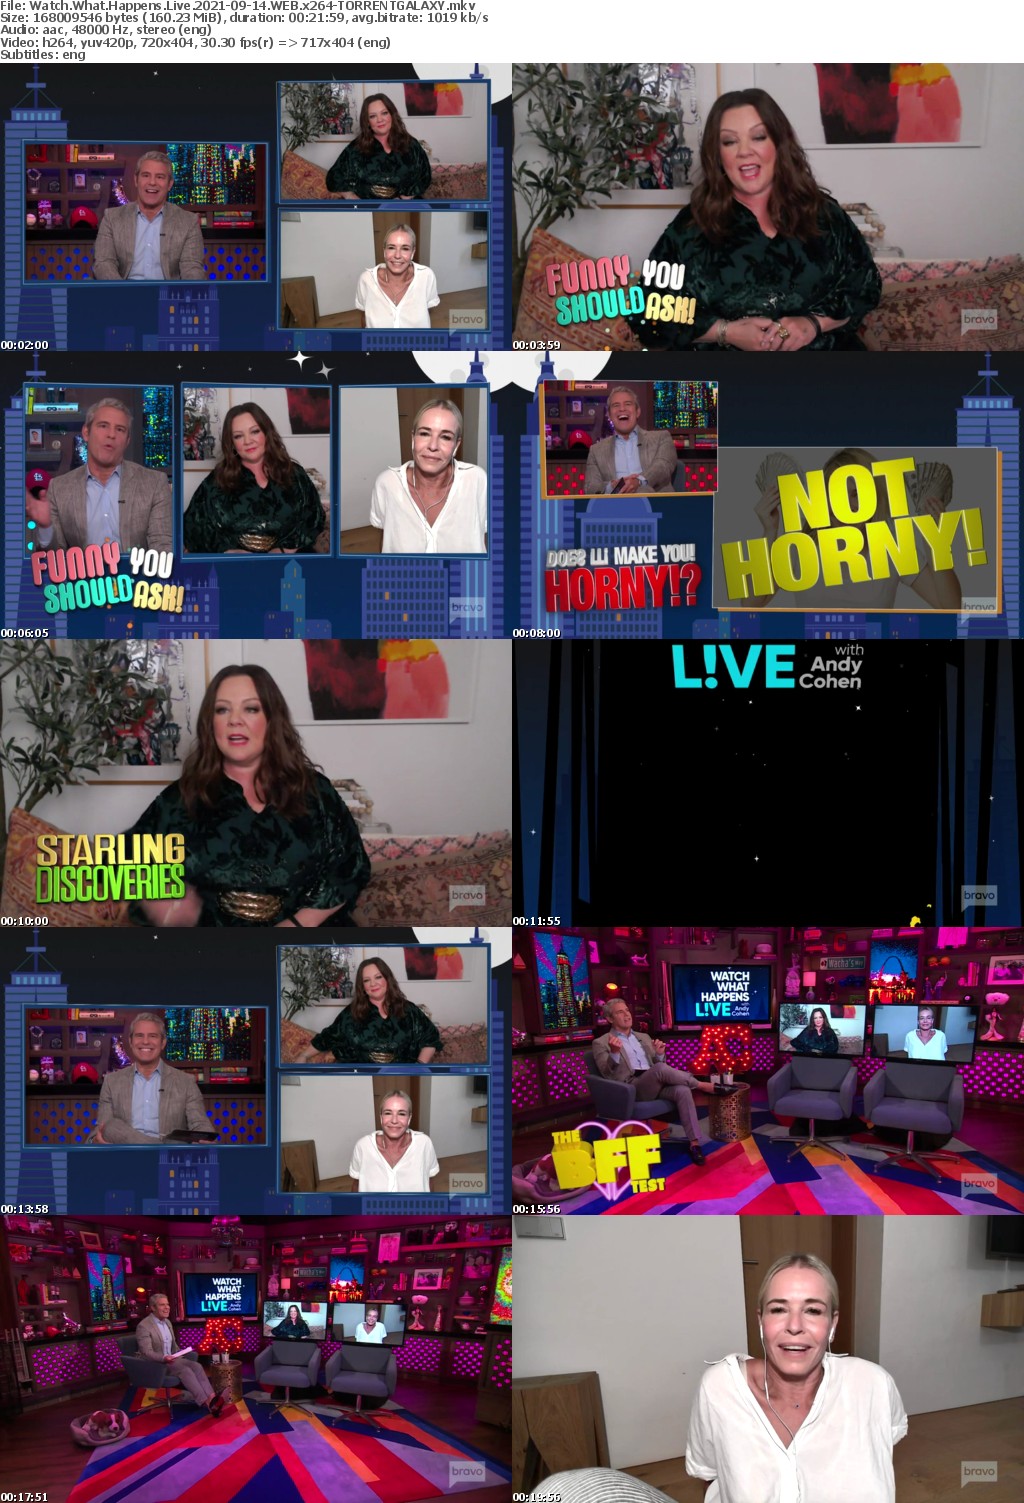 Watch What Happens Live 2021-09-14 WEB x264-GALAXY